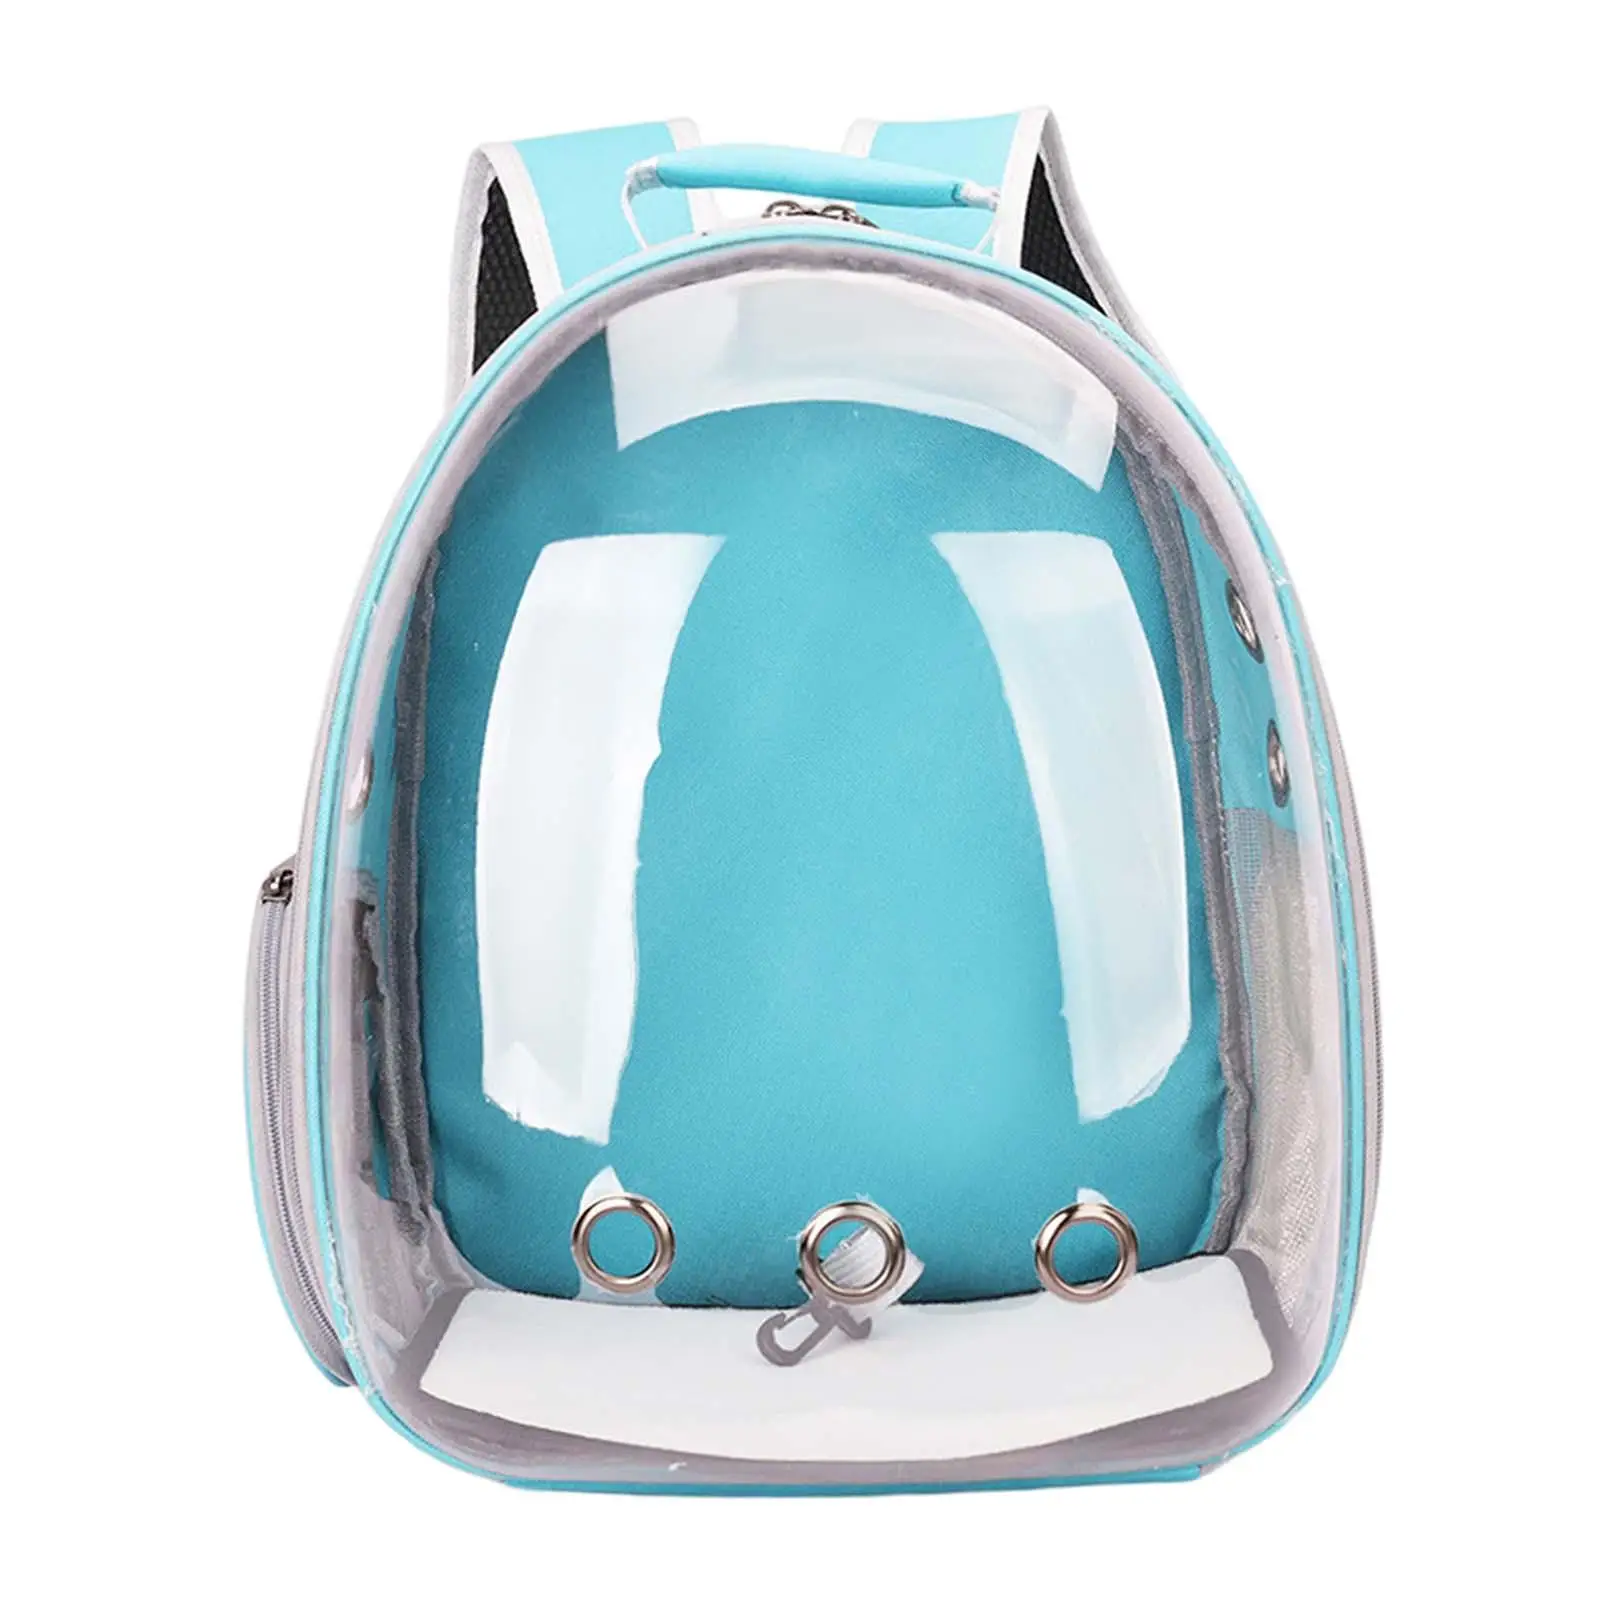 Cat Carrier Backpack Small Dog Backpack Carrier for Hiking Traveling Outdoor